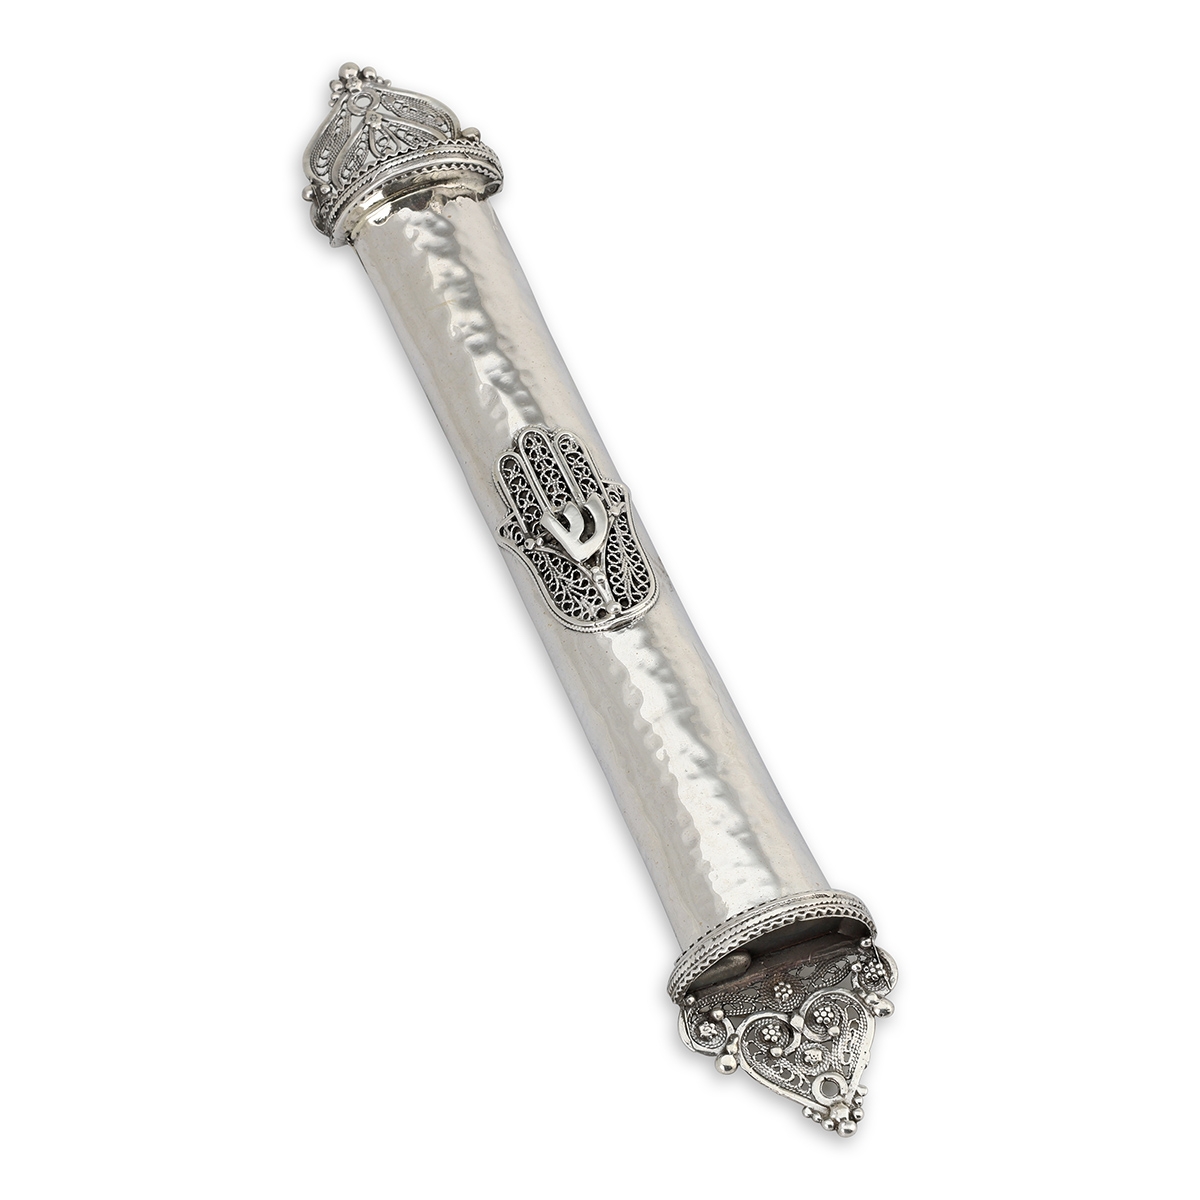 Handcrafted Sterling Silver Mezuzah Case With Large Hamsa Design By Traditional Yemenite Art - 1